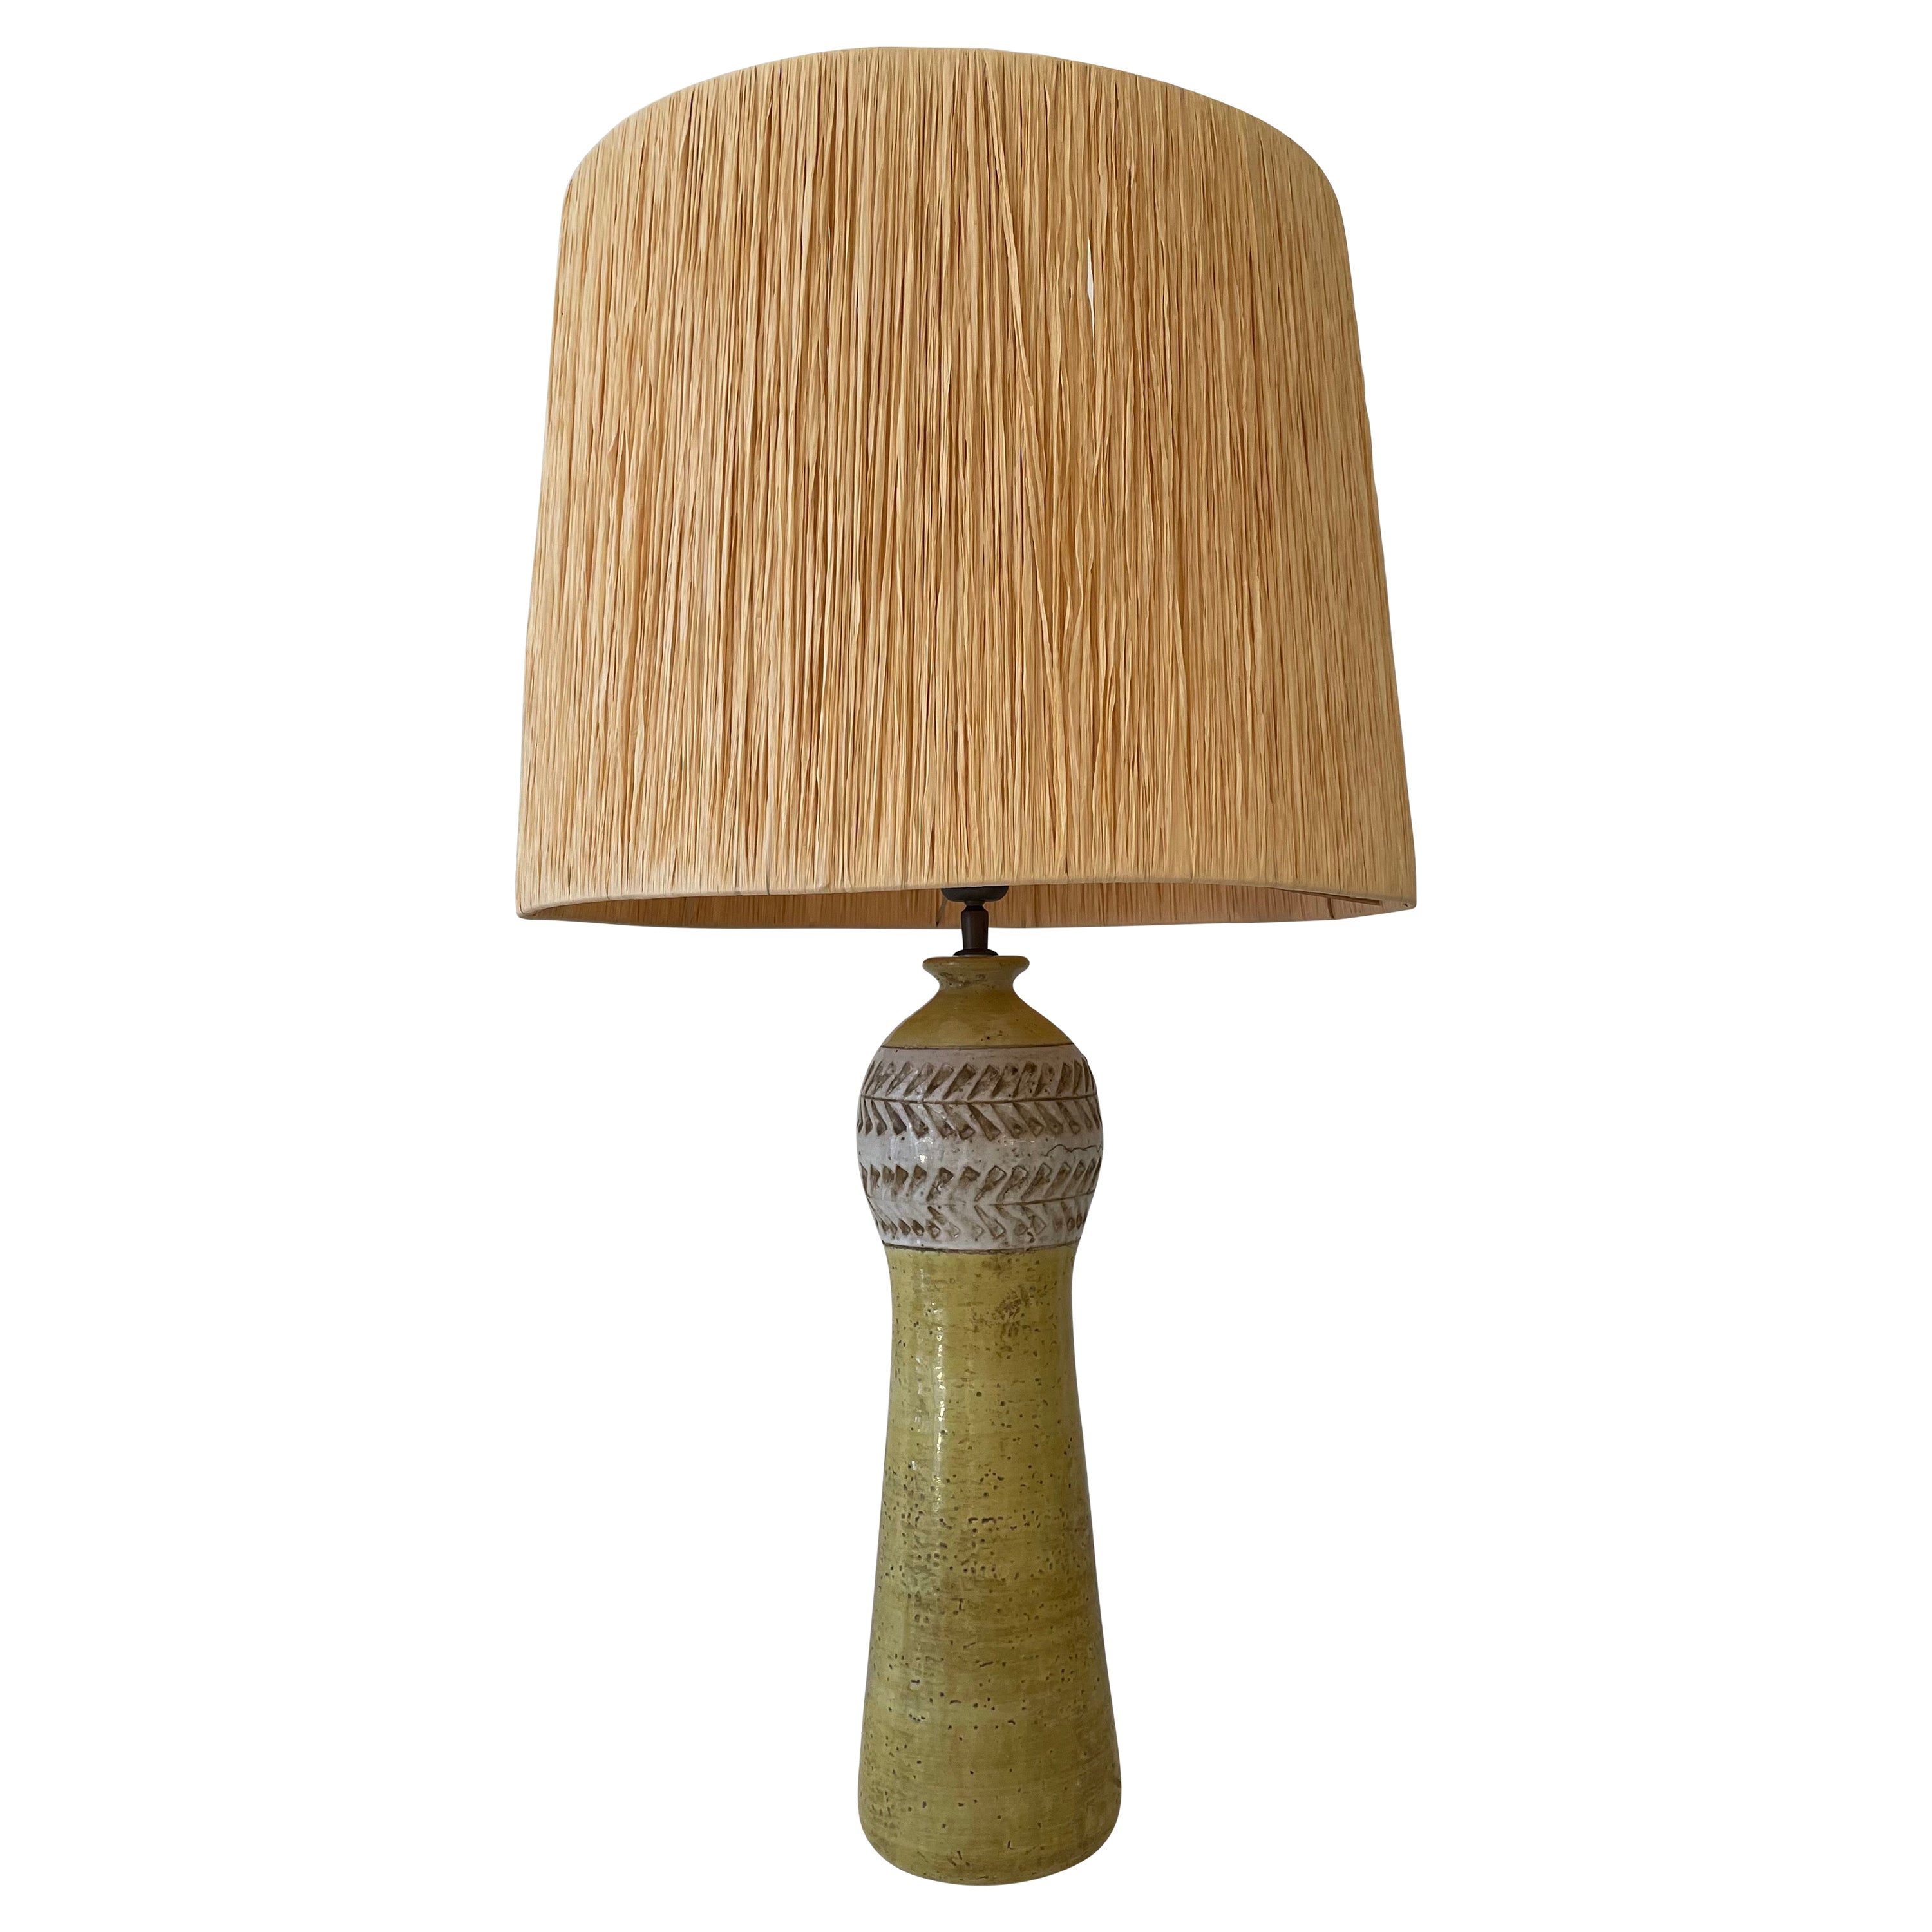 Mid-Century Modern Yellow Ceramic and Raffia Table Lamp by Bitossi, Italy, 1960s